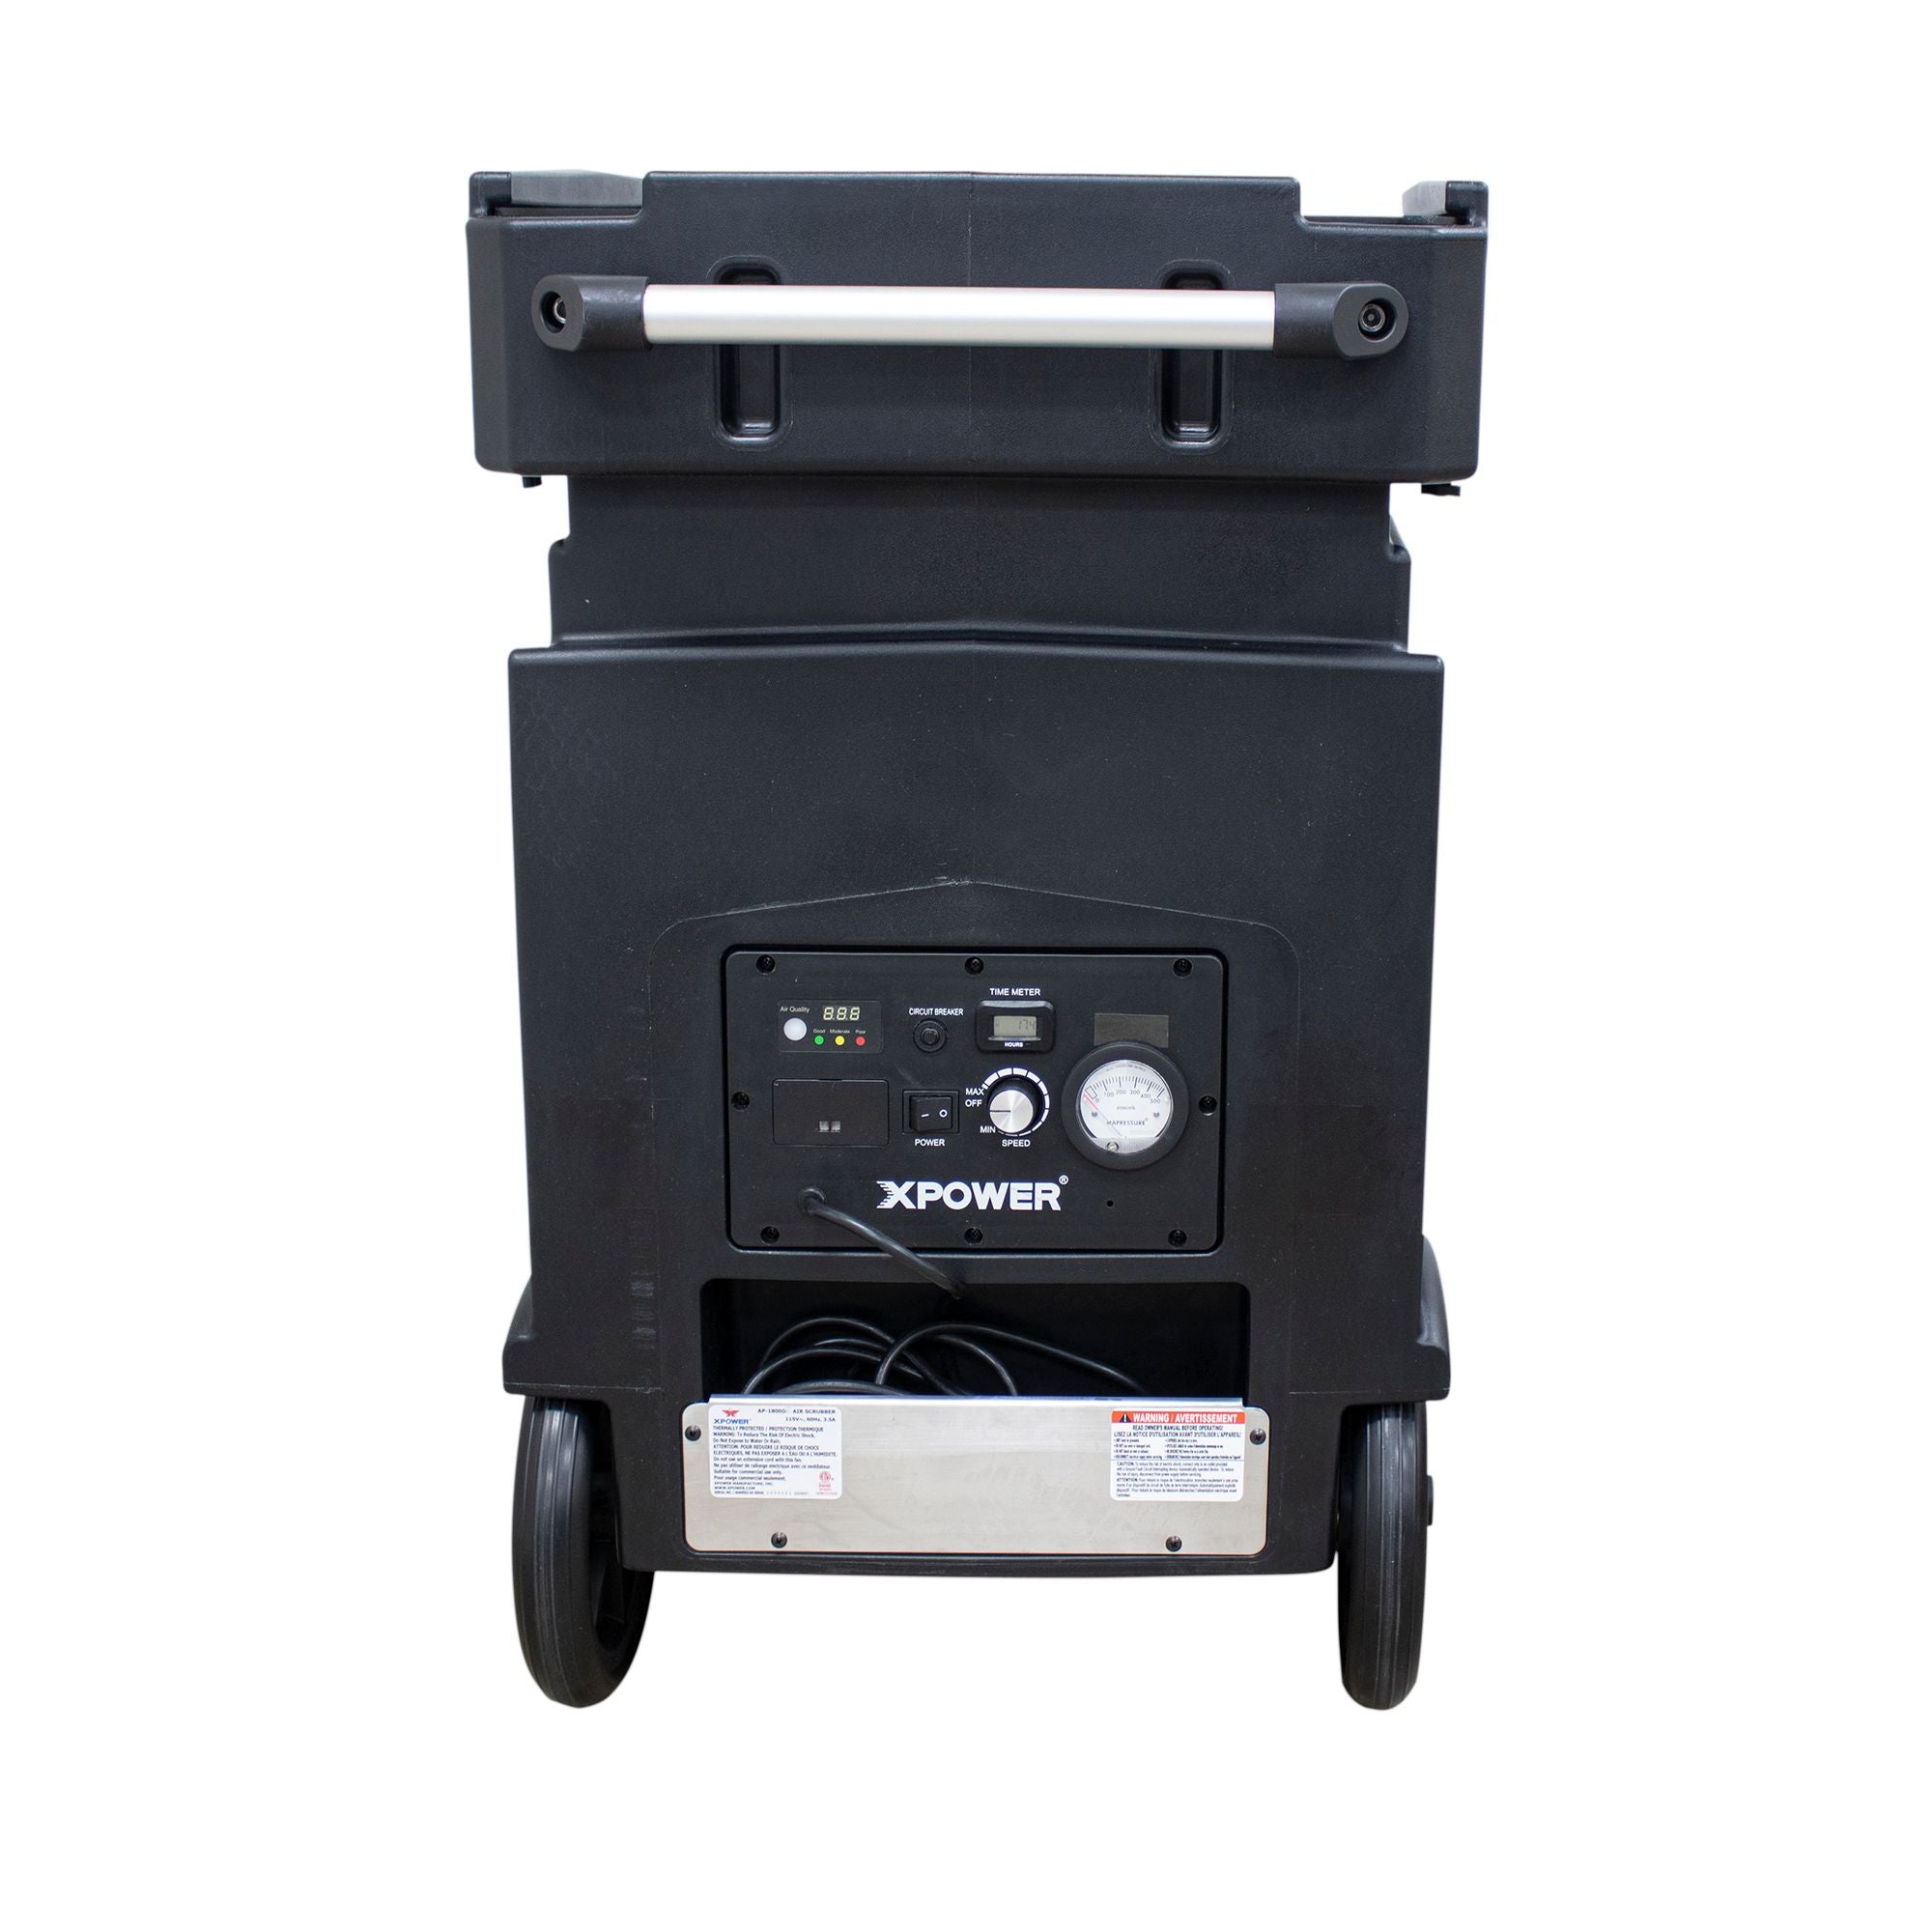 Dark Slate Gray XPOWER AP-1800D MEGA Commercial HEPA Filtration Air Purification System